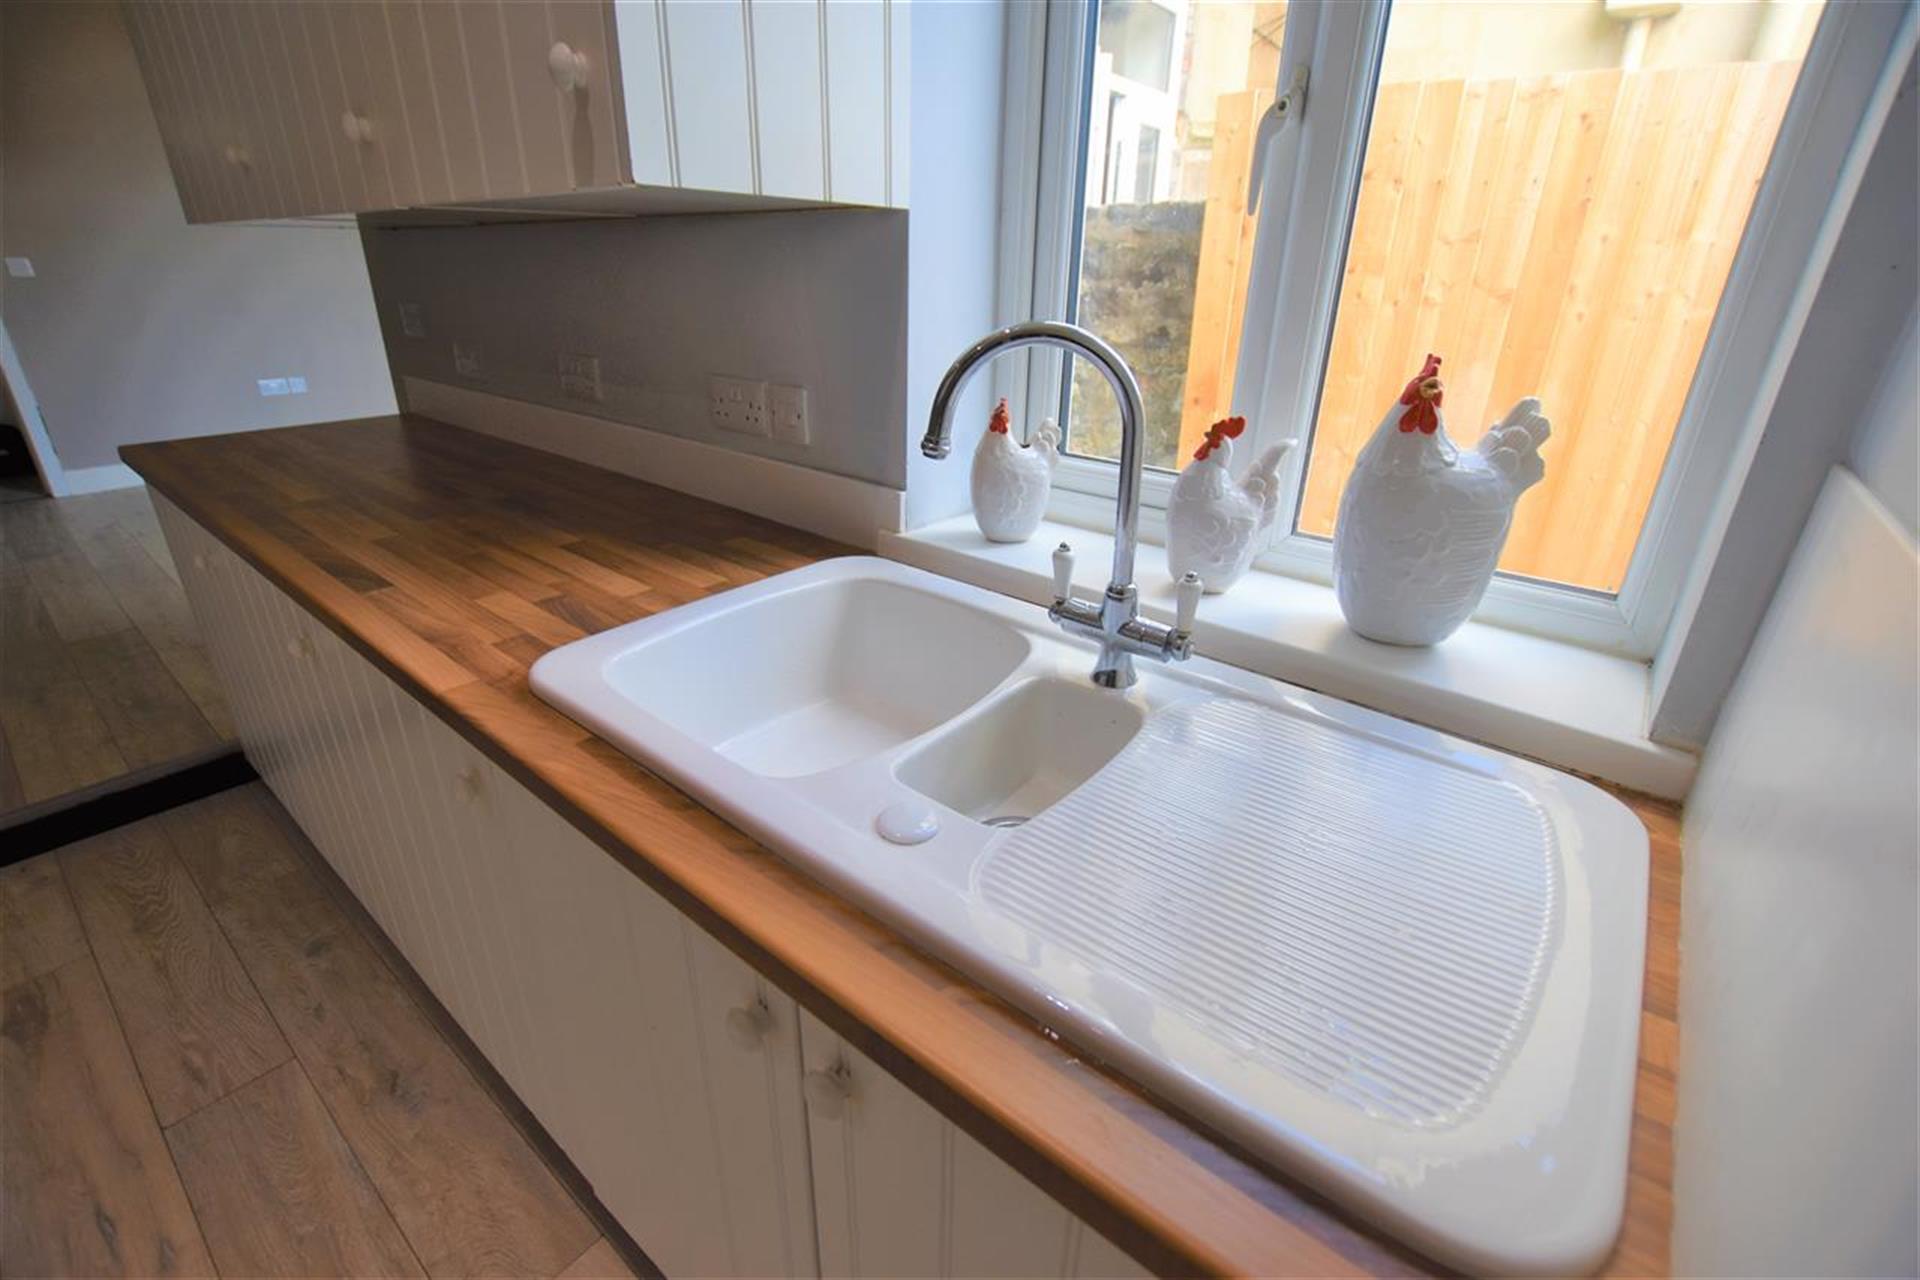 3 Bedroom End Terraced House For Sale - Kitchen